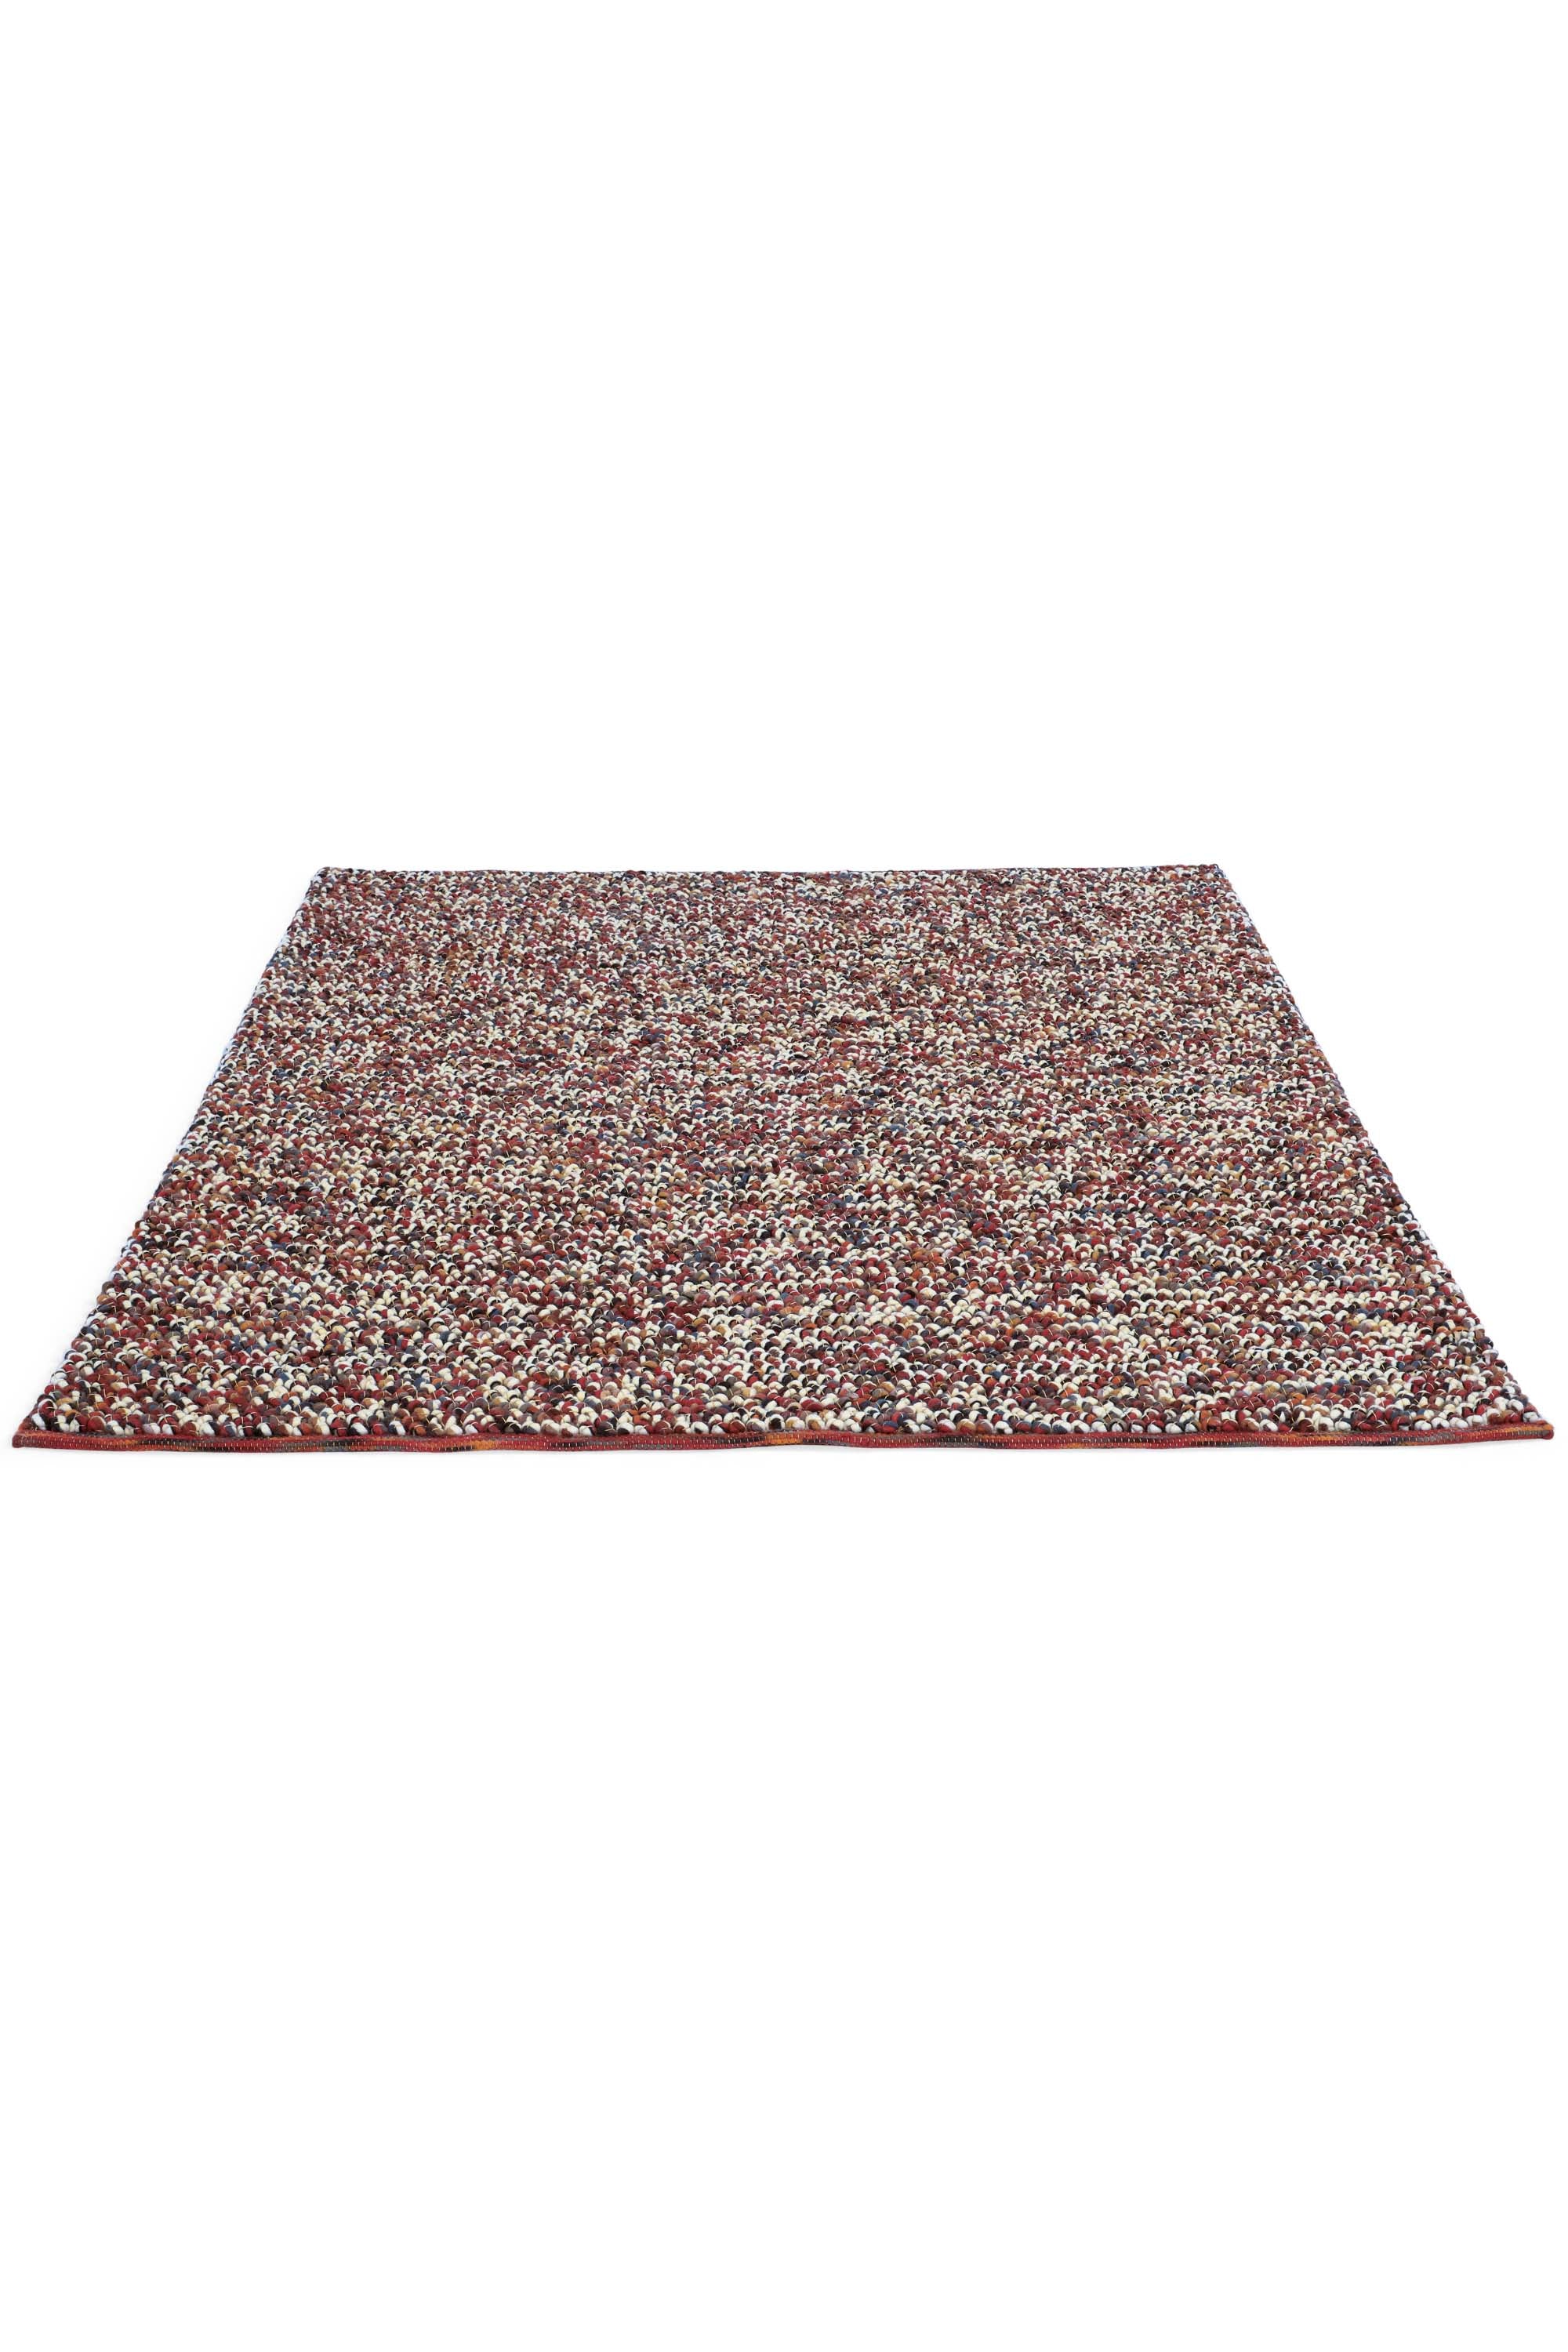 brink and campman red textured wool and jute rug